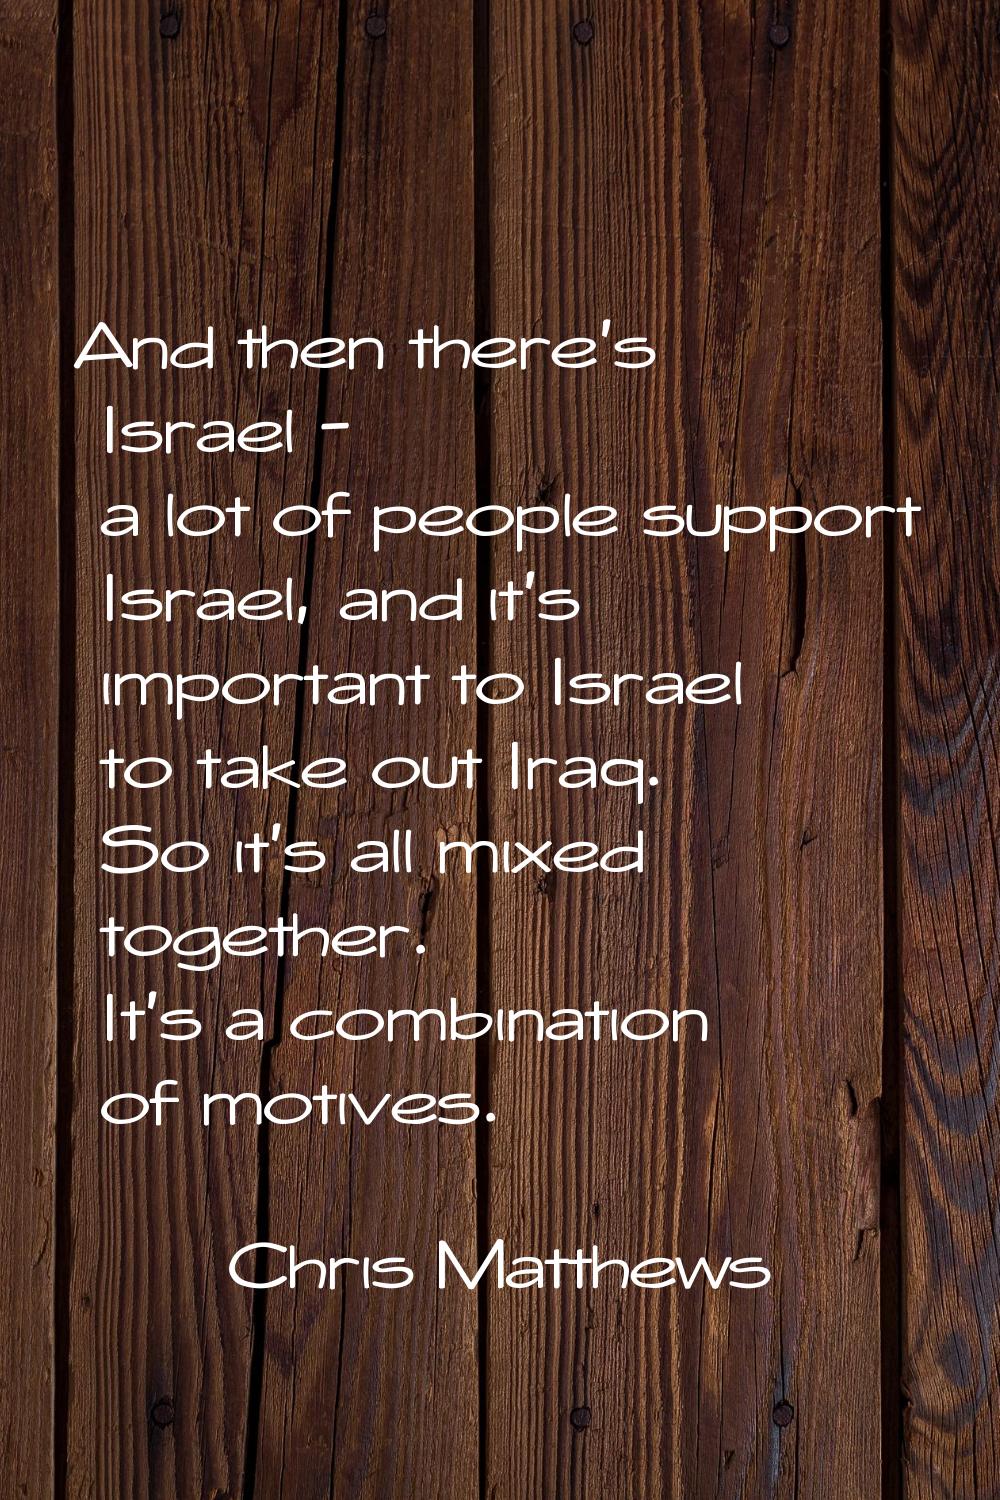 And then there's Israel - a lot of people support Israel, and it's important to Israel to take out 